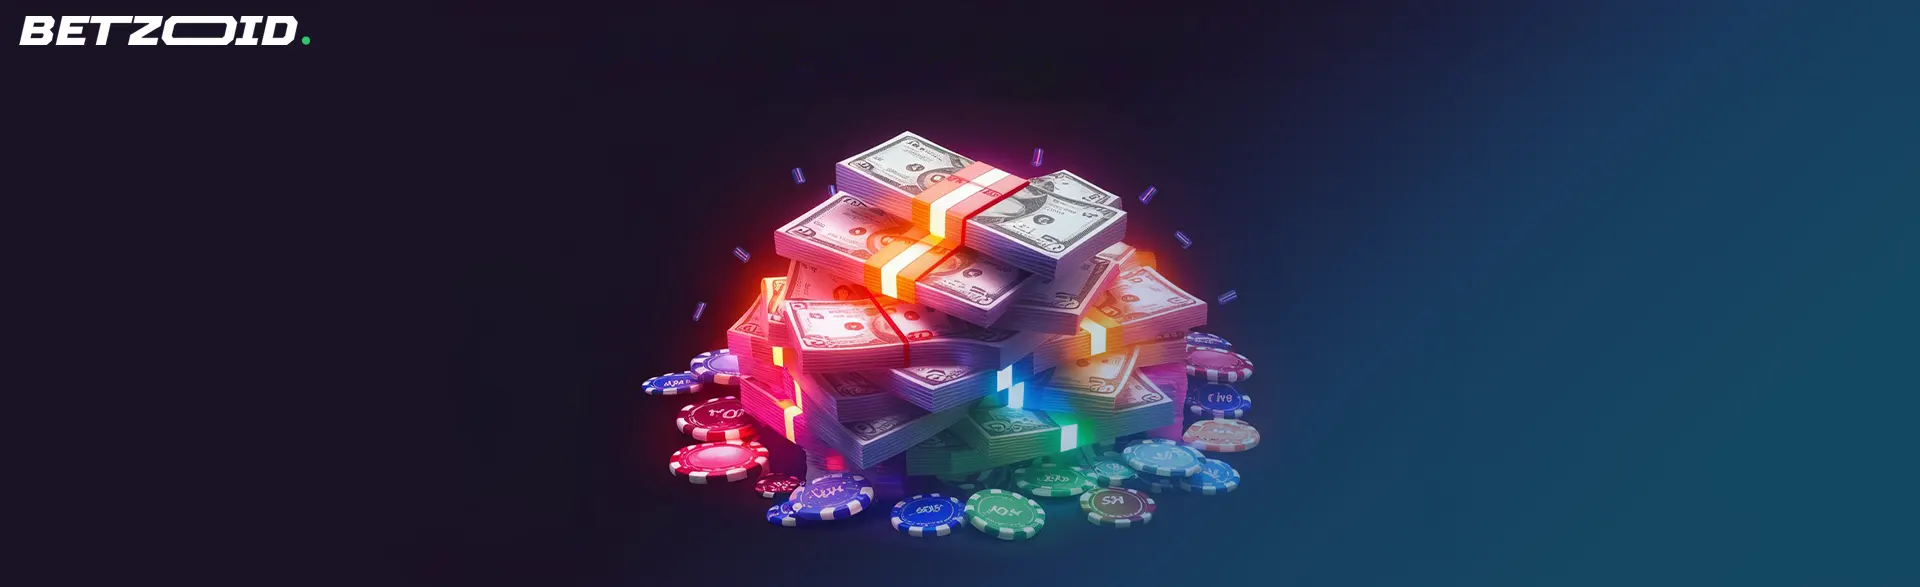 Stacks of cash and casino chips for free signup bonus no deposit casino in Ontario.